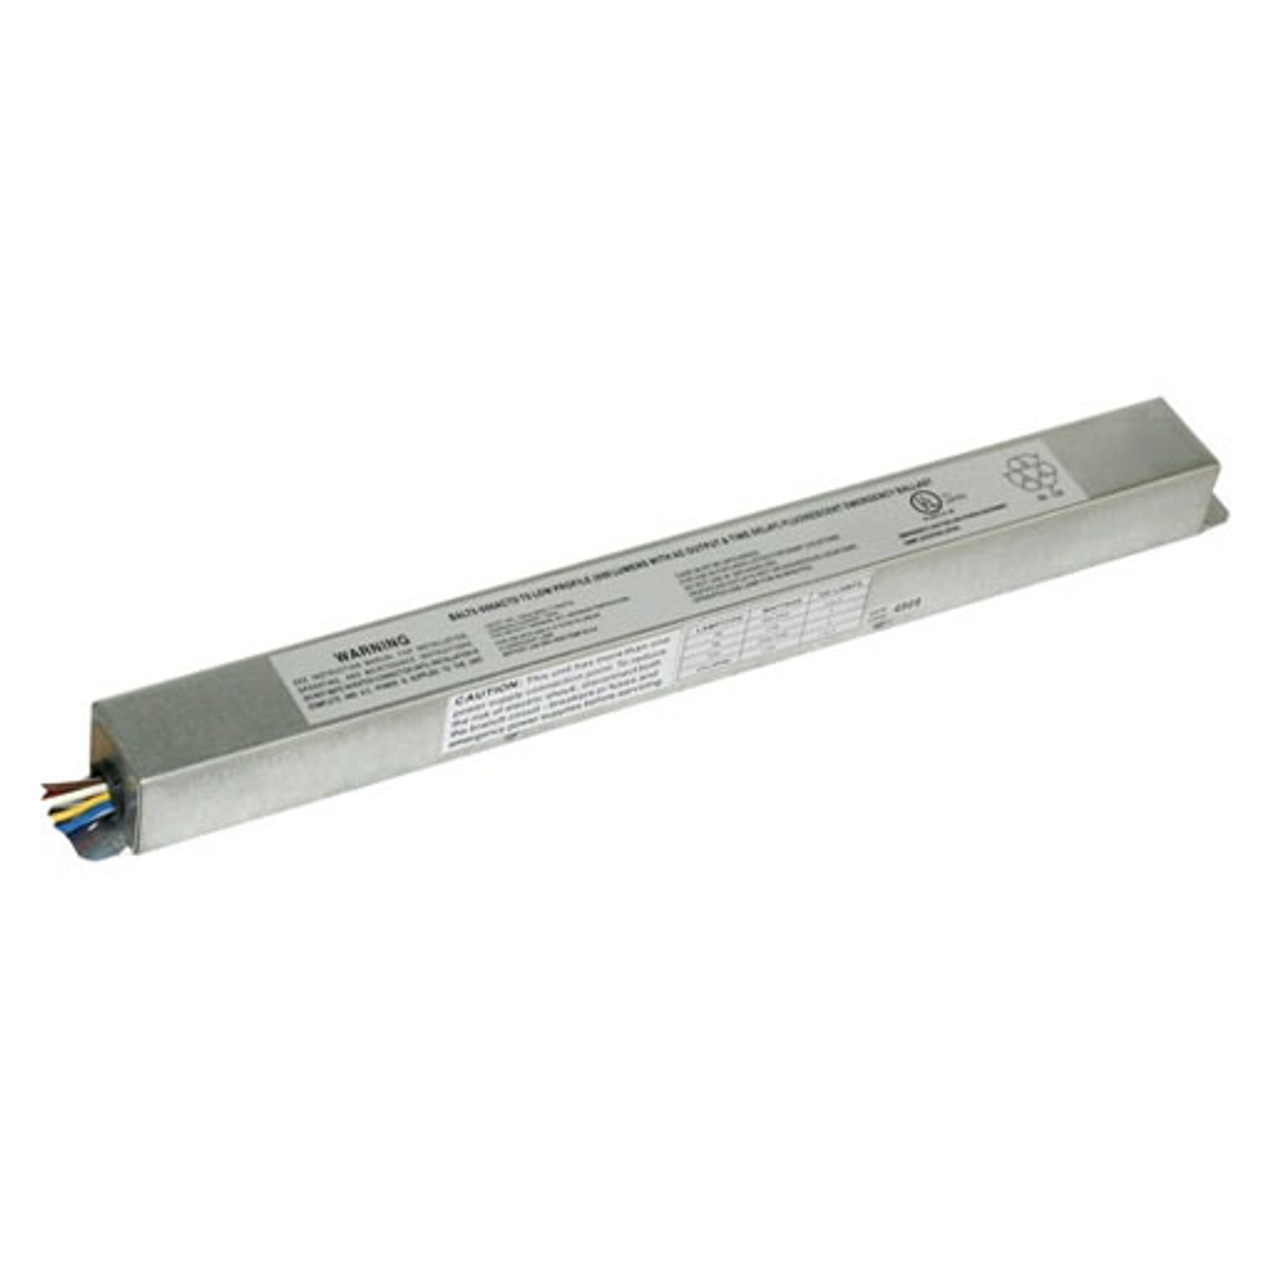 Works with or without an AC ballast to convert new or existing fluorescent fixtures in to unobtrusive emergency lighting.
Operates one lamp in the emergency mode for a minimum of 90-minutes.
Provides a maximum initial lumen output of 500 lumens.
Dual 120/277 voltage.
Charge rate/power “ON” LED indicator light and push-to-test switch for mandated code compliance testing.
3.6V long life, maintenance-free, rechargeable sealed NiCd battery.
Internal solid-state transfer switch automatically connects the internal battery to fluorescent lamp for minimum
90-minute emergency illumination.
Fully automatic solid-state, two rate charger initiates battery charging to recharge a discharged battery in 24 hours.
Time delay enhancement to overcome end-of-life circuit protection.
Suitable for installation inside, on top or in remote* of the fixture.
Can be used in both switched and unswitched fixtures.
UL Listed for factory or field installation.